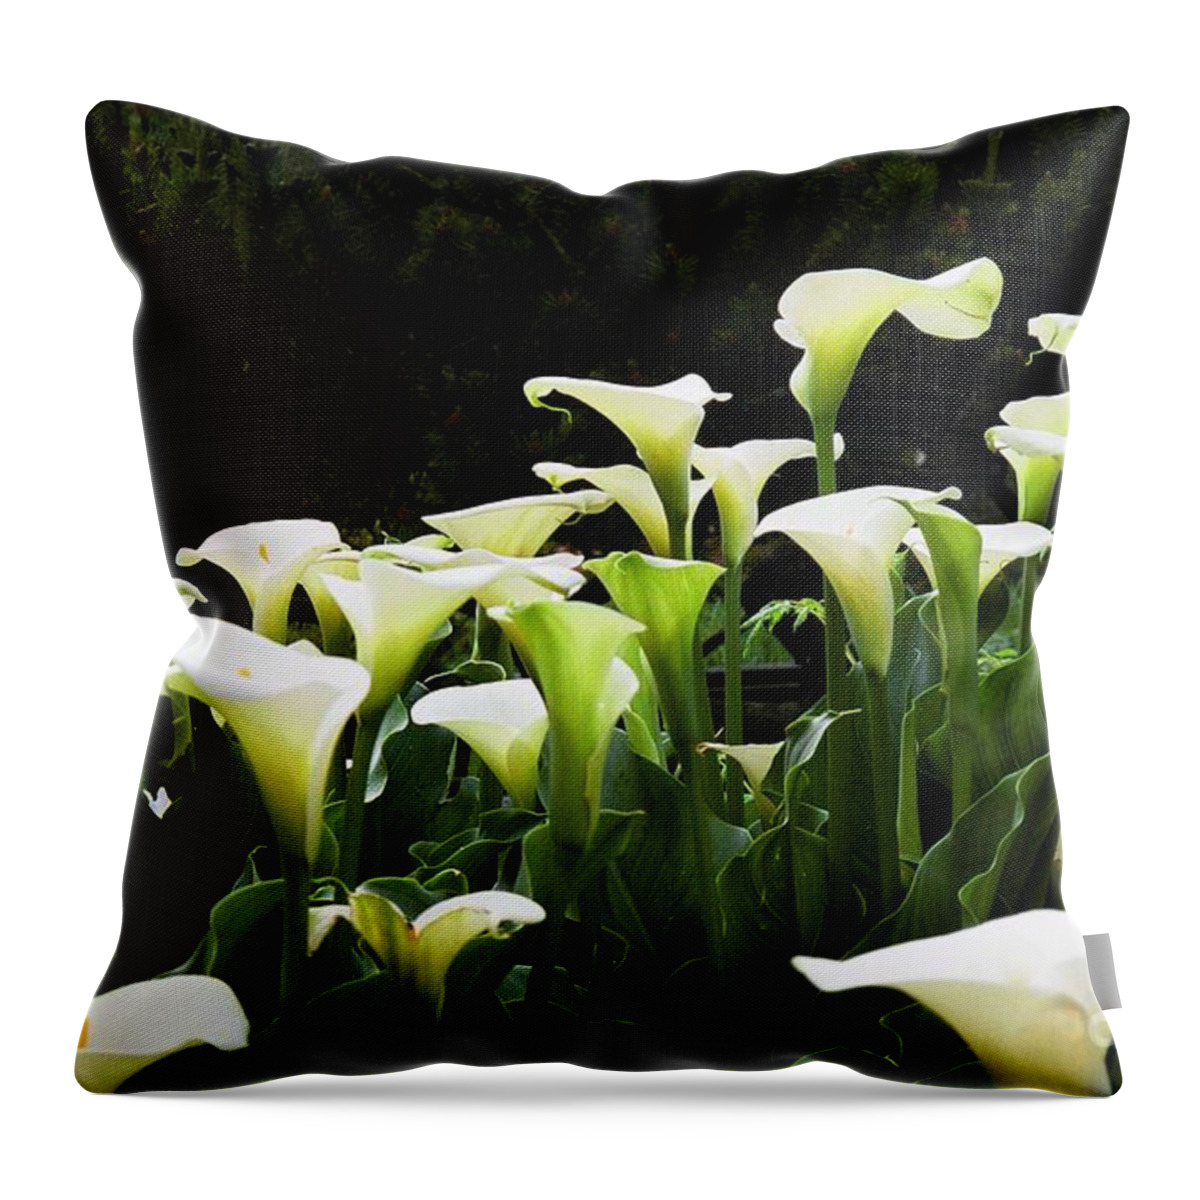 Flowers Throw Pillow featuring the photograph Cali Lily by Kim Prowse